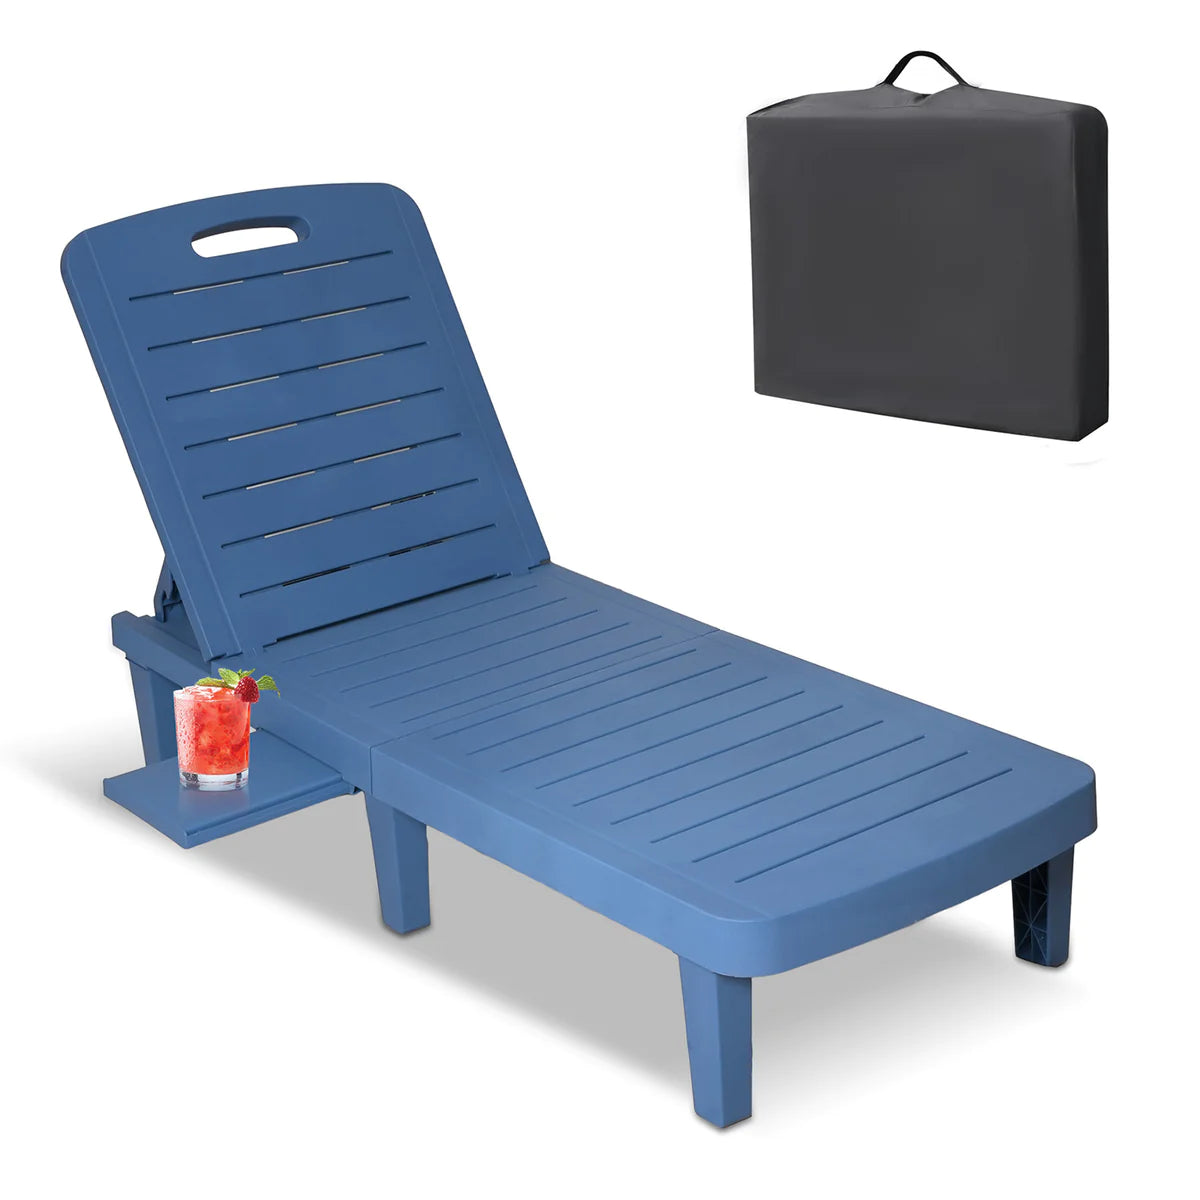 Outdoor Beach Chairs Lounge Chairs with Adjustable Backs, Blue